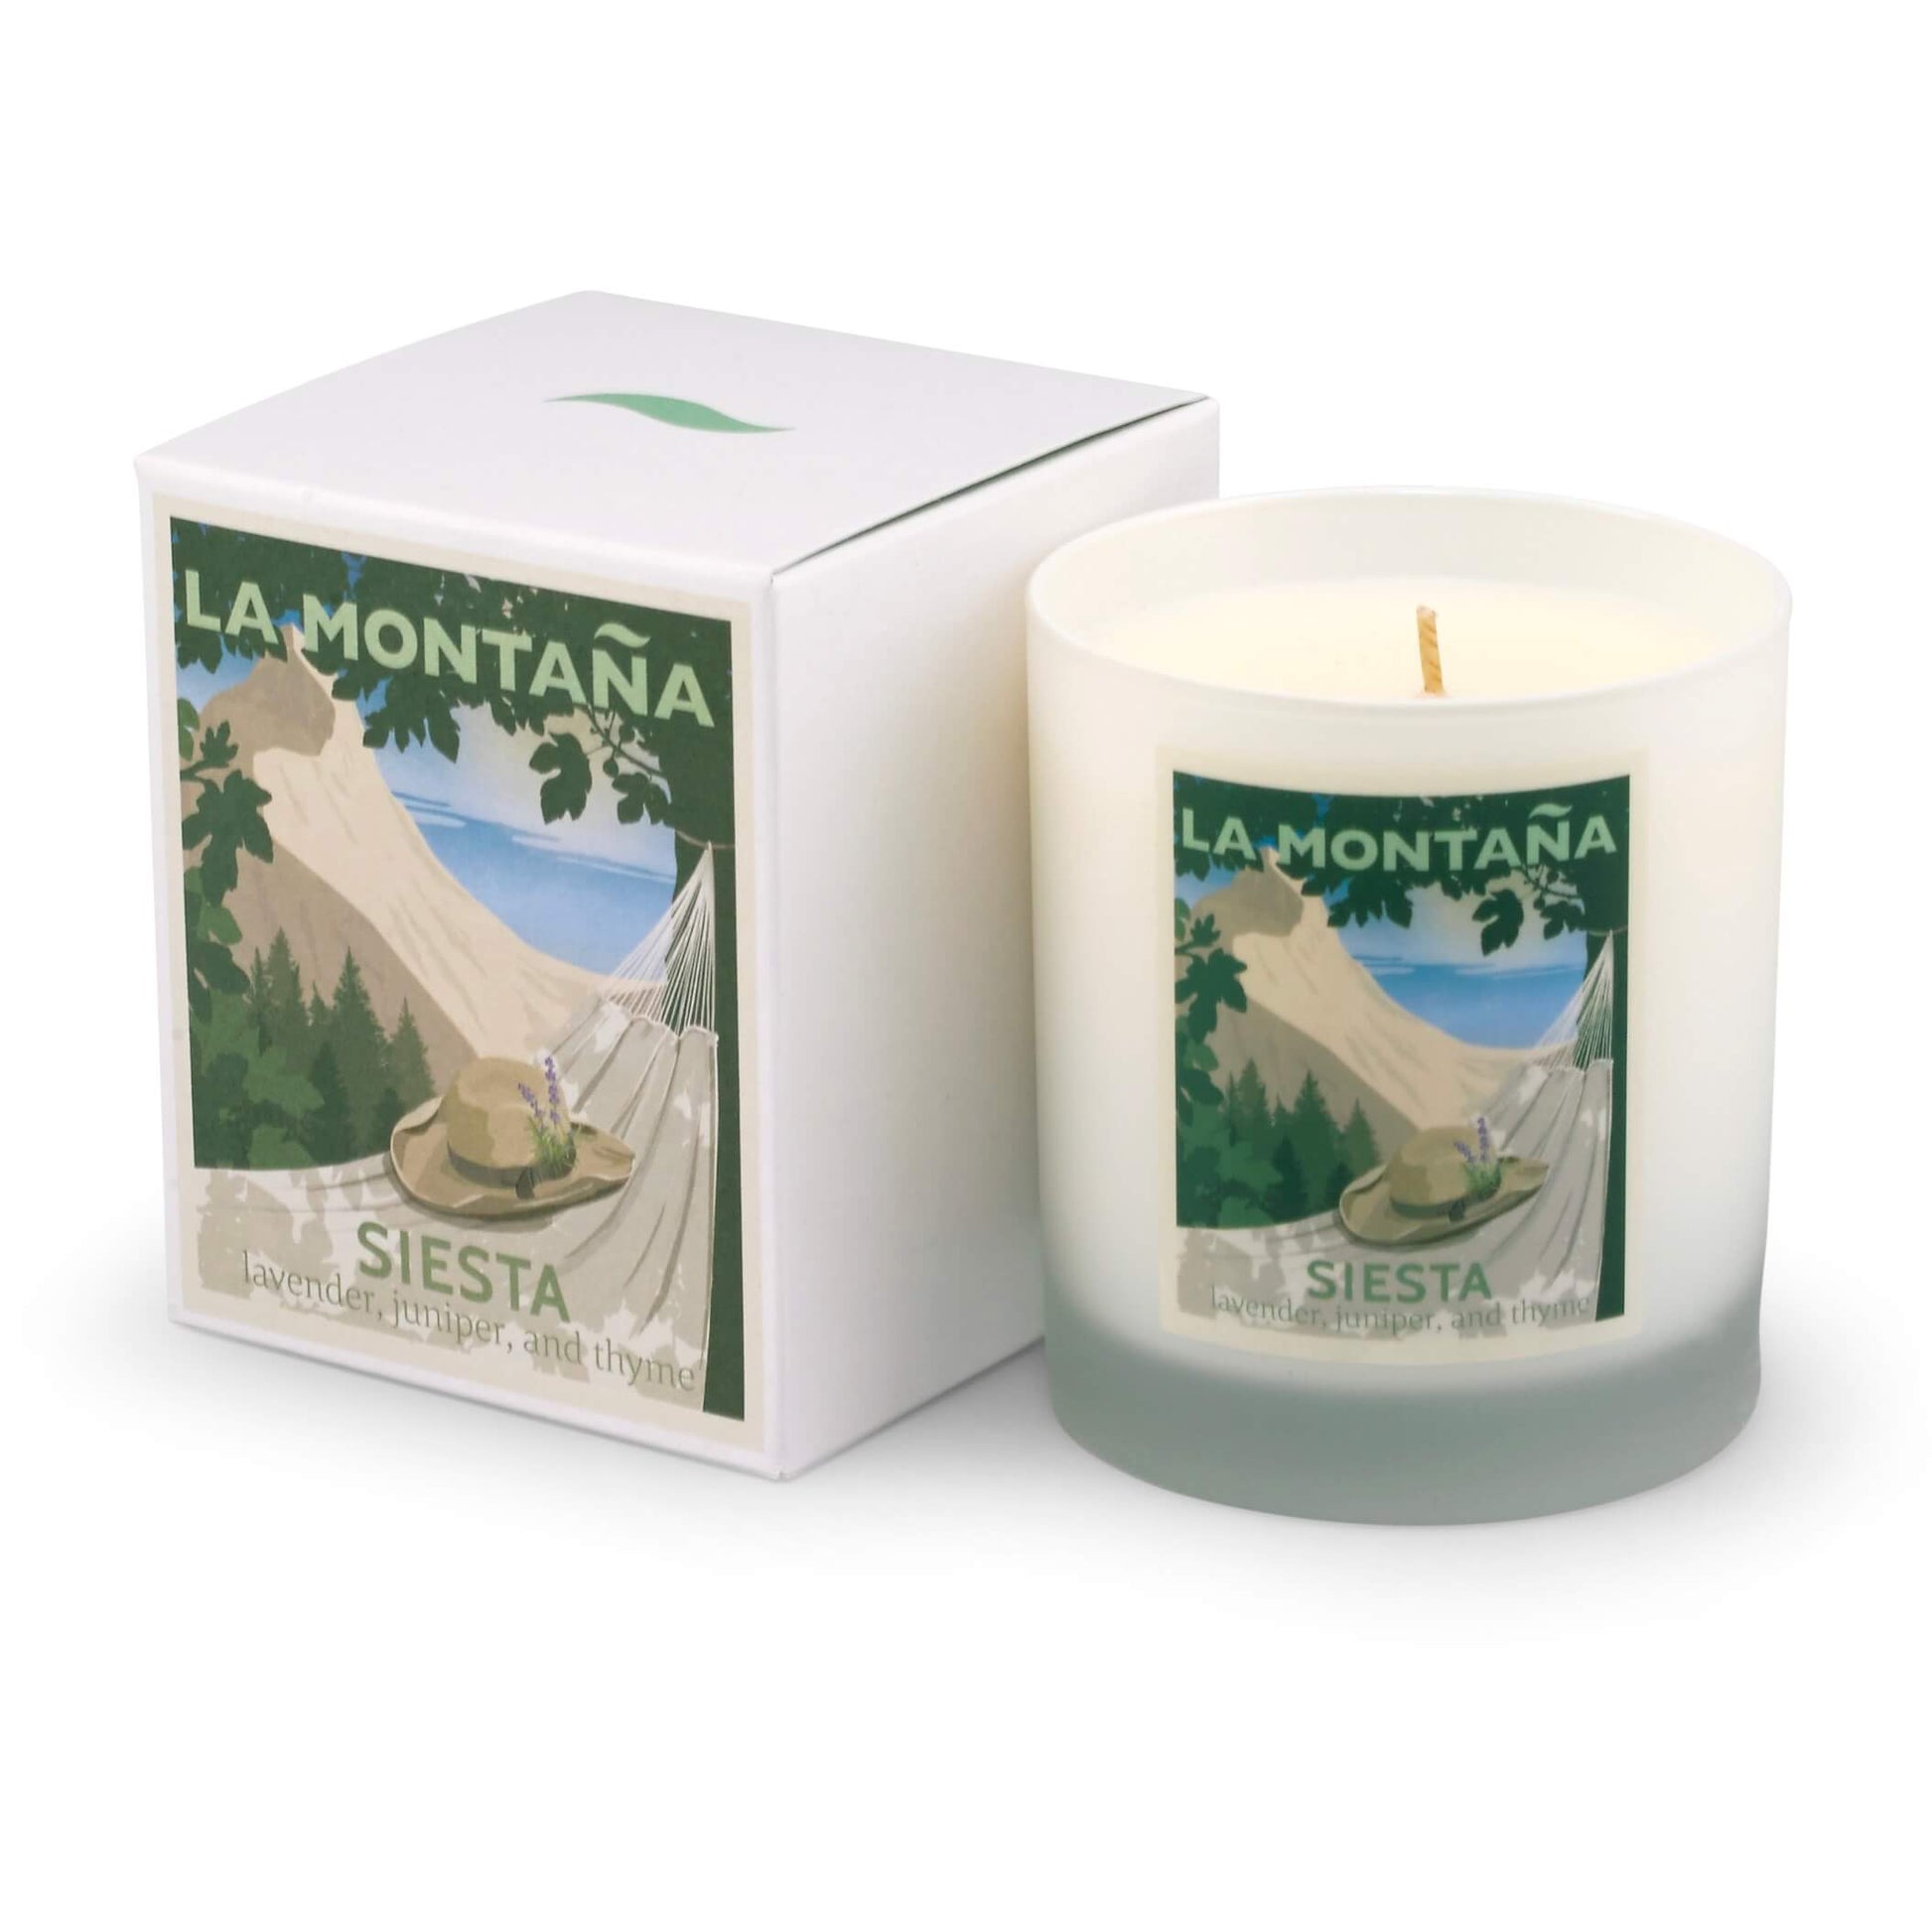 La Montaña Siesta Scented Candle - Osmology Scented Candles & Home Fragrance